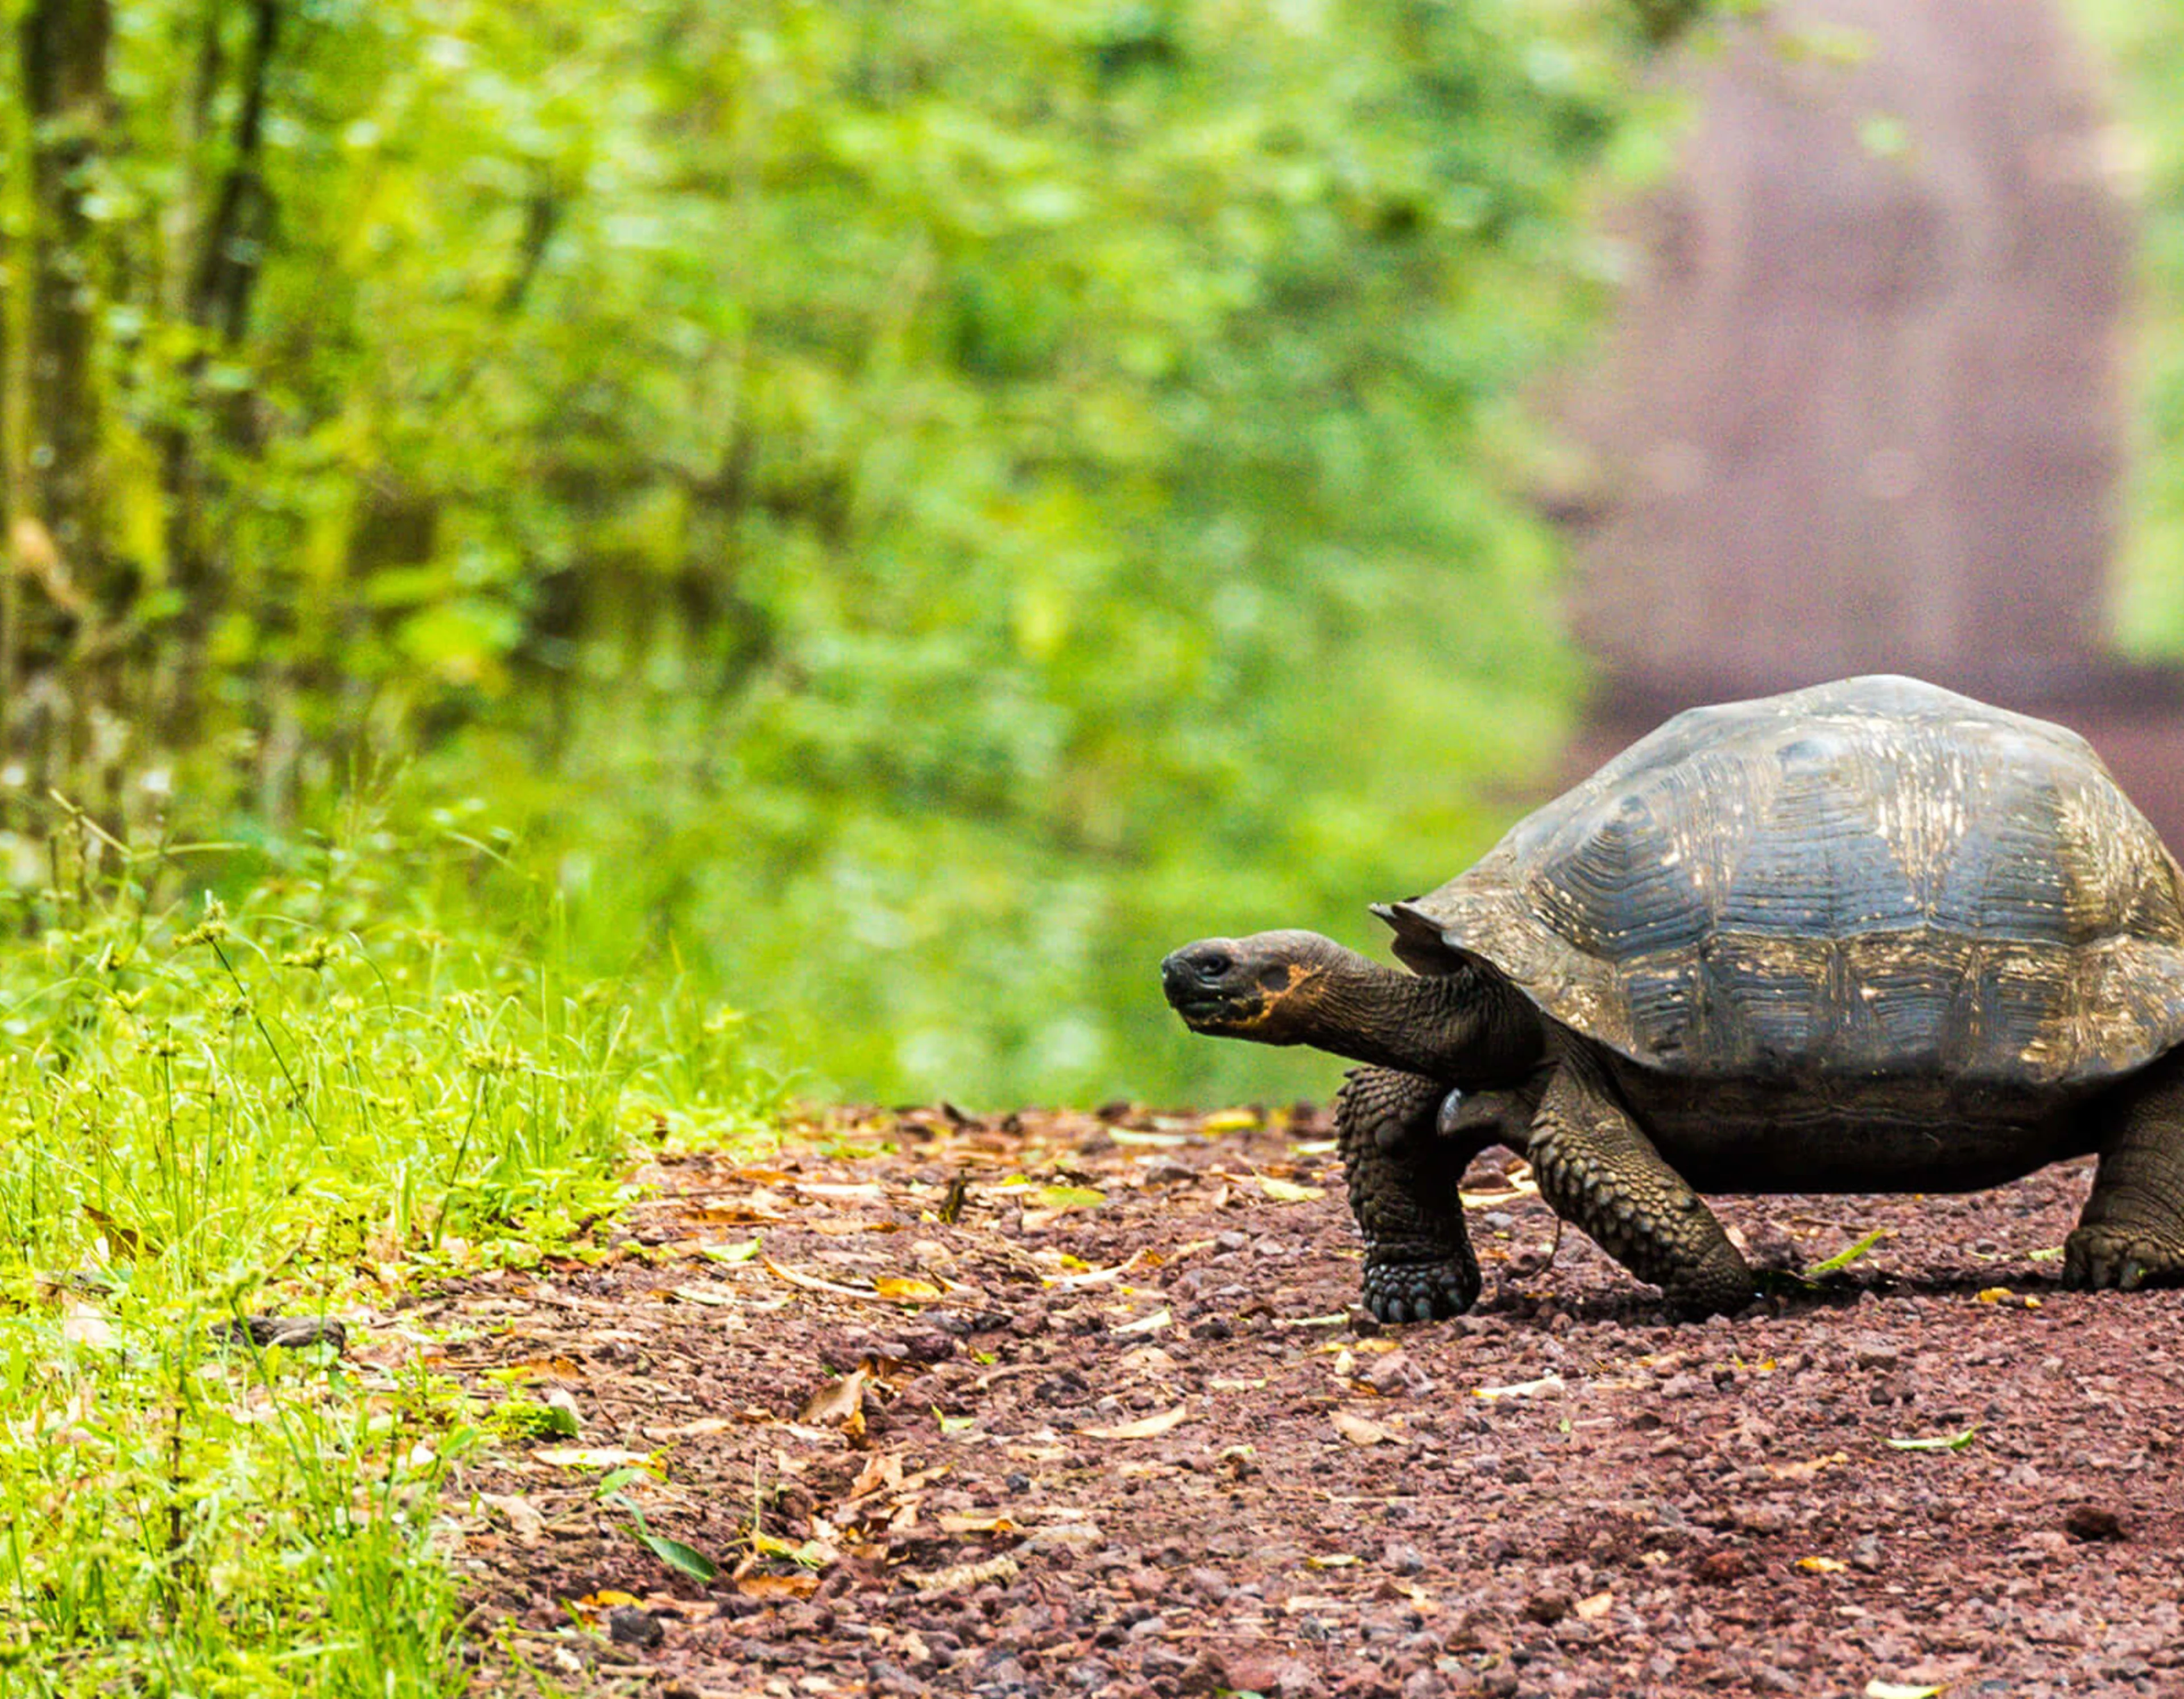 Tortoise crossing a path in the woods